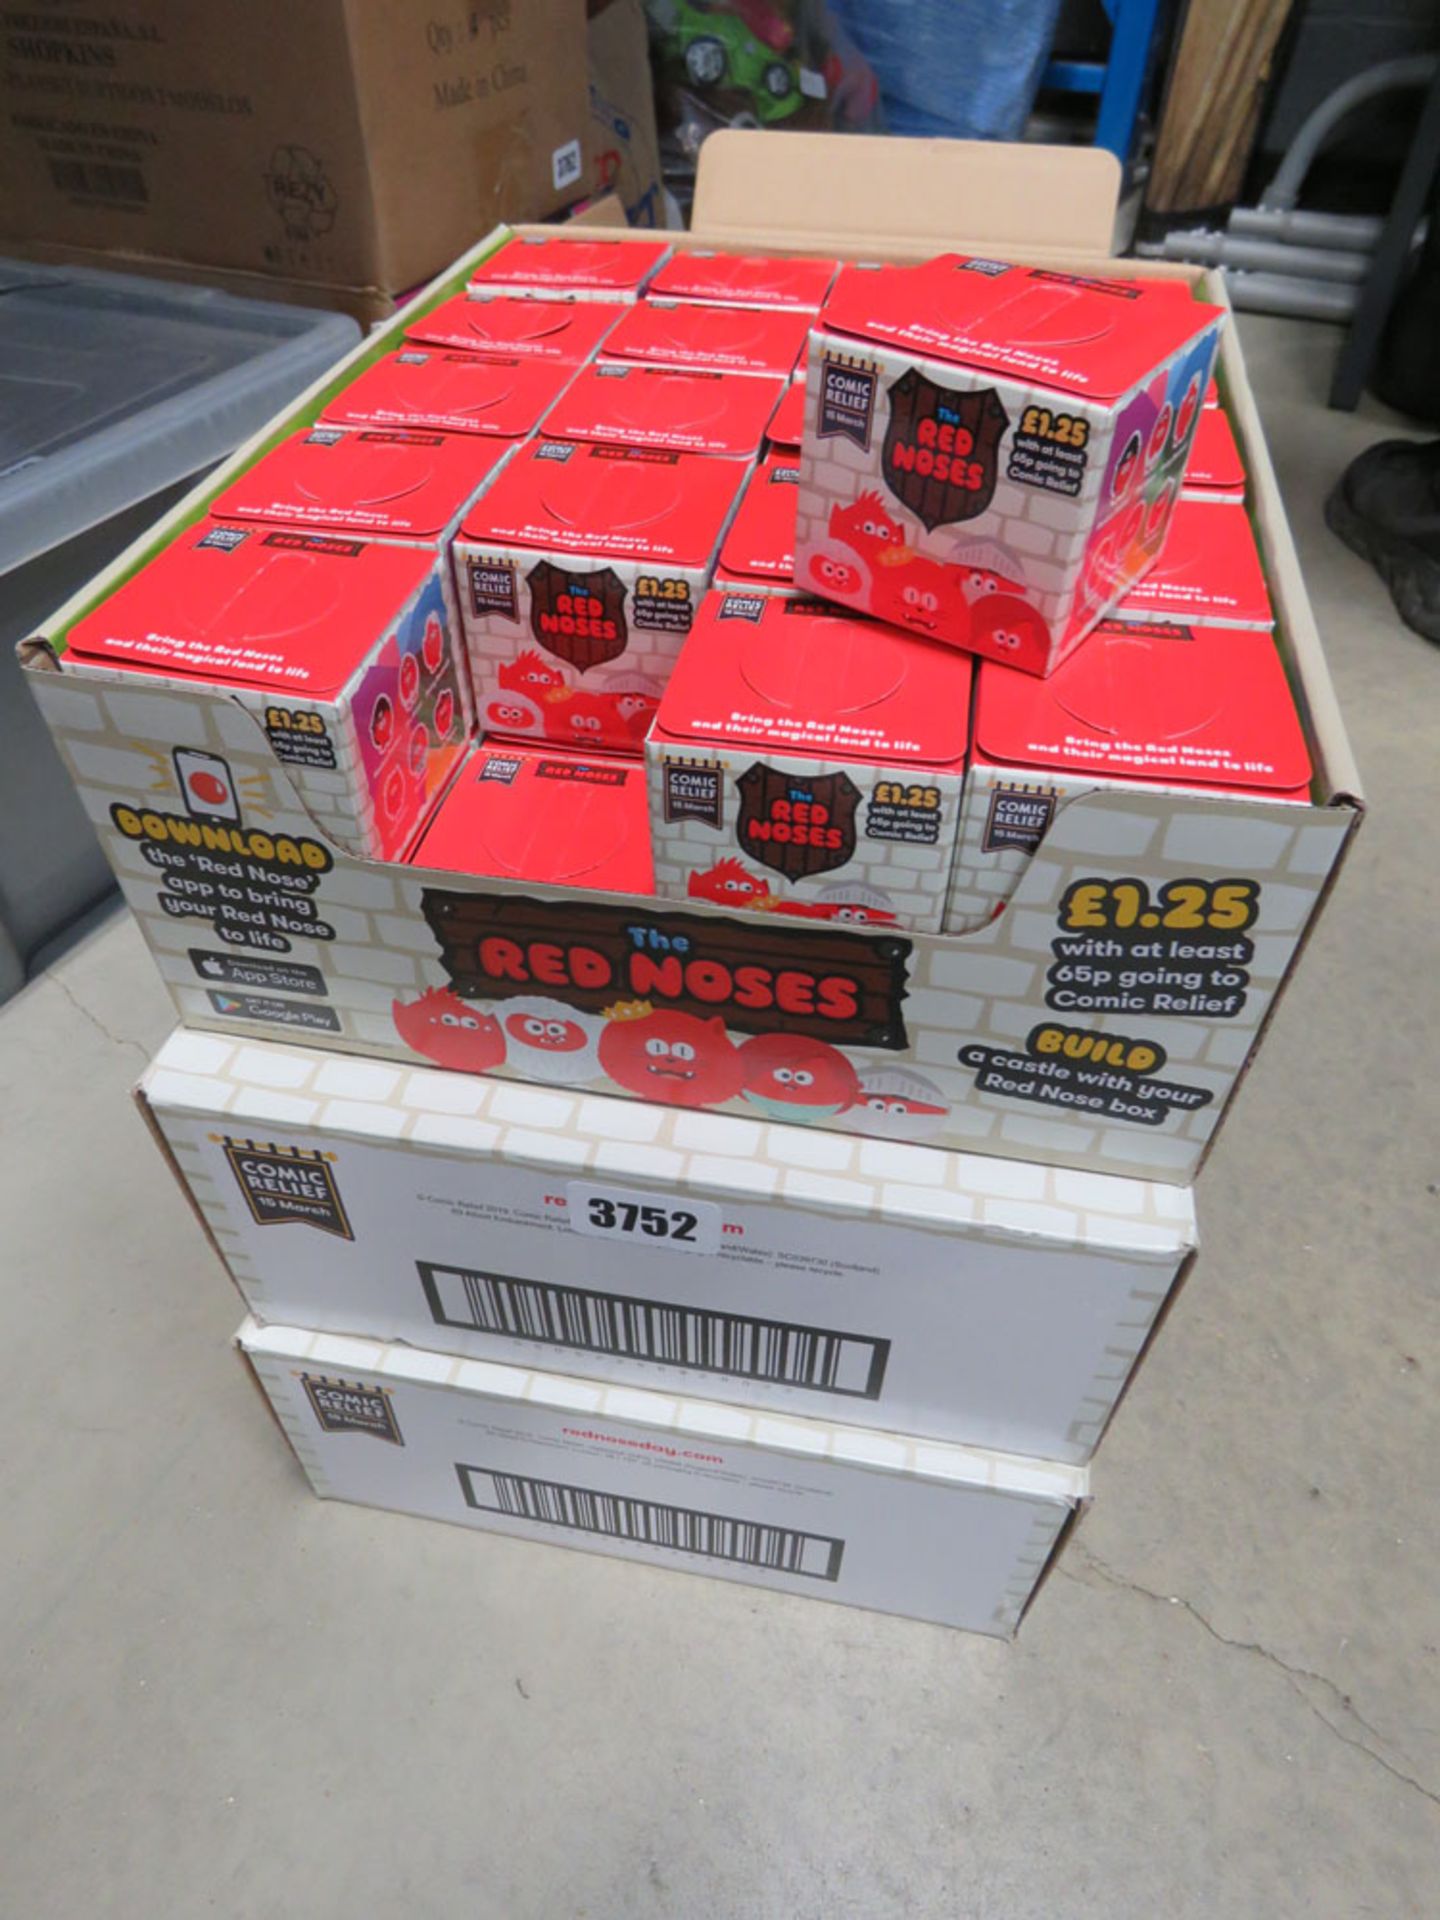 3 boxed of Comic Relief red noses